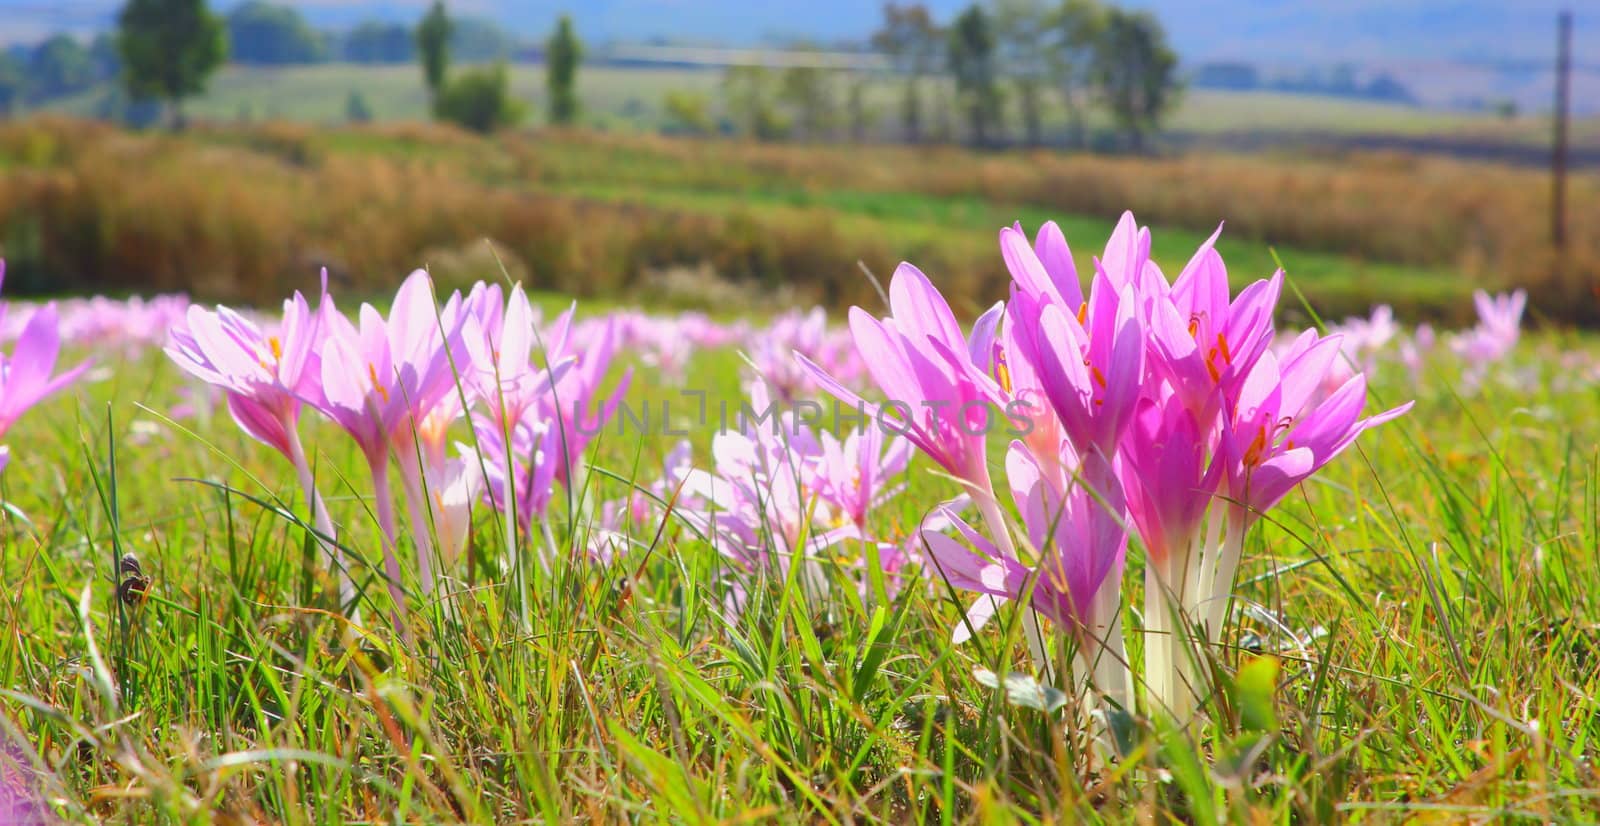 detail of an autumn crocus (colchicum autumnale) in the field